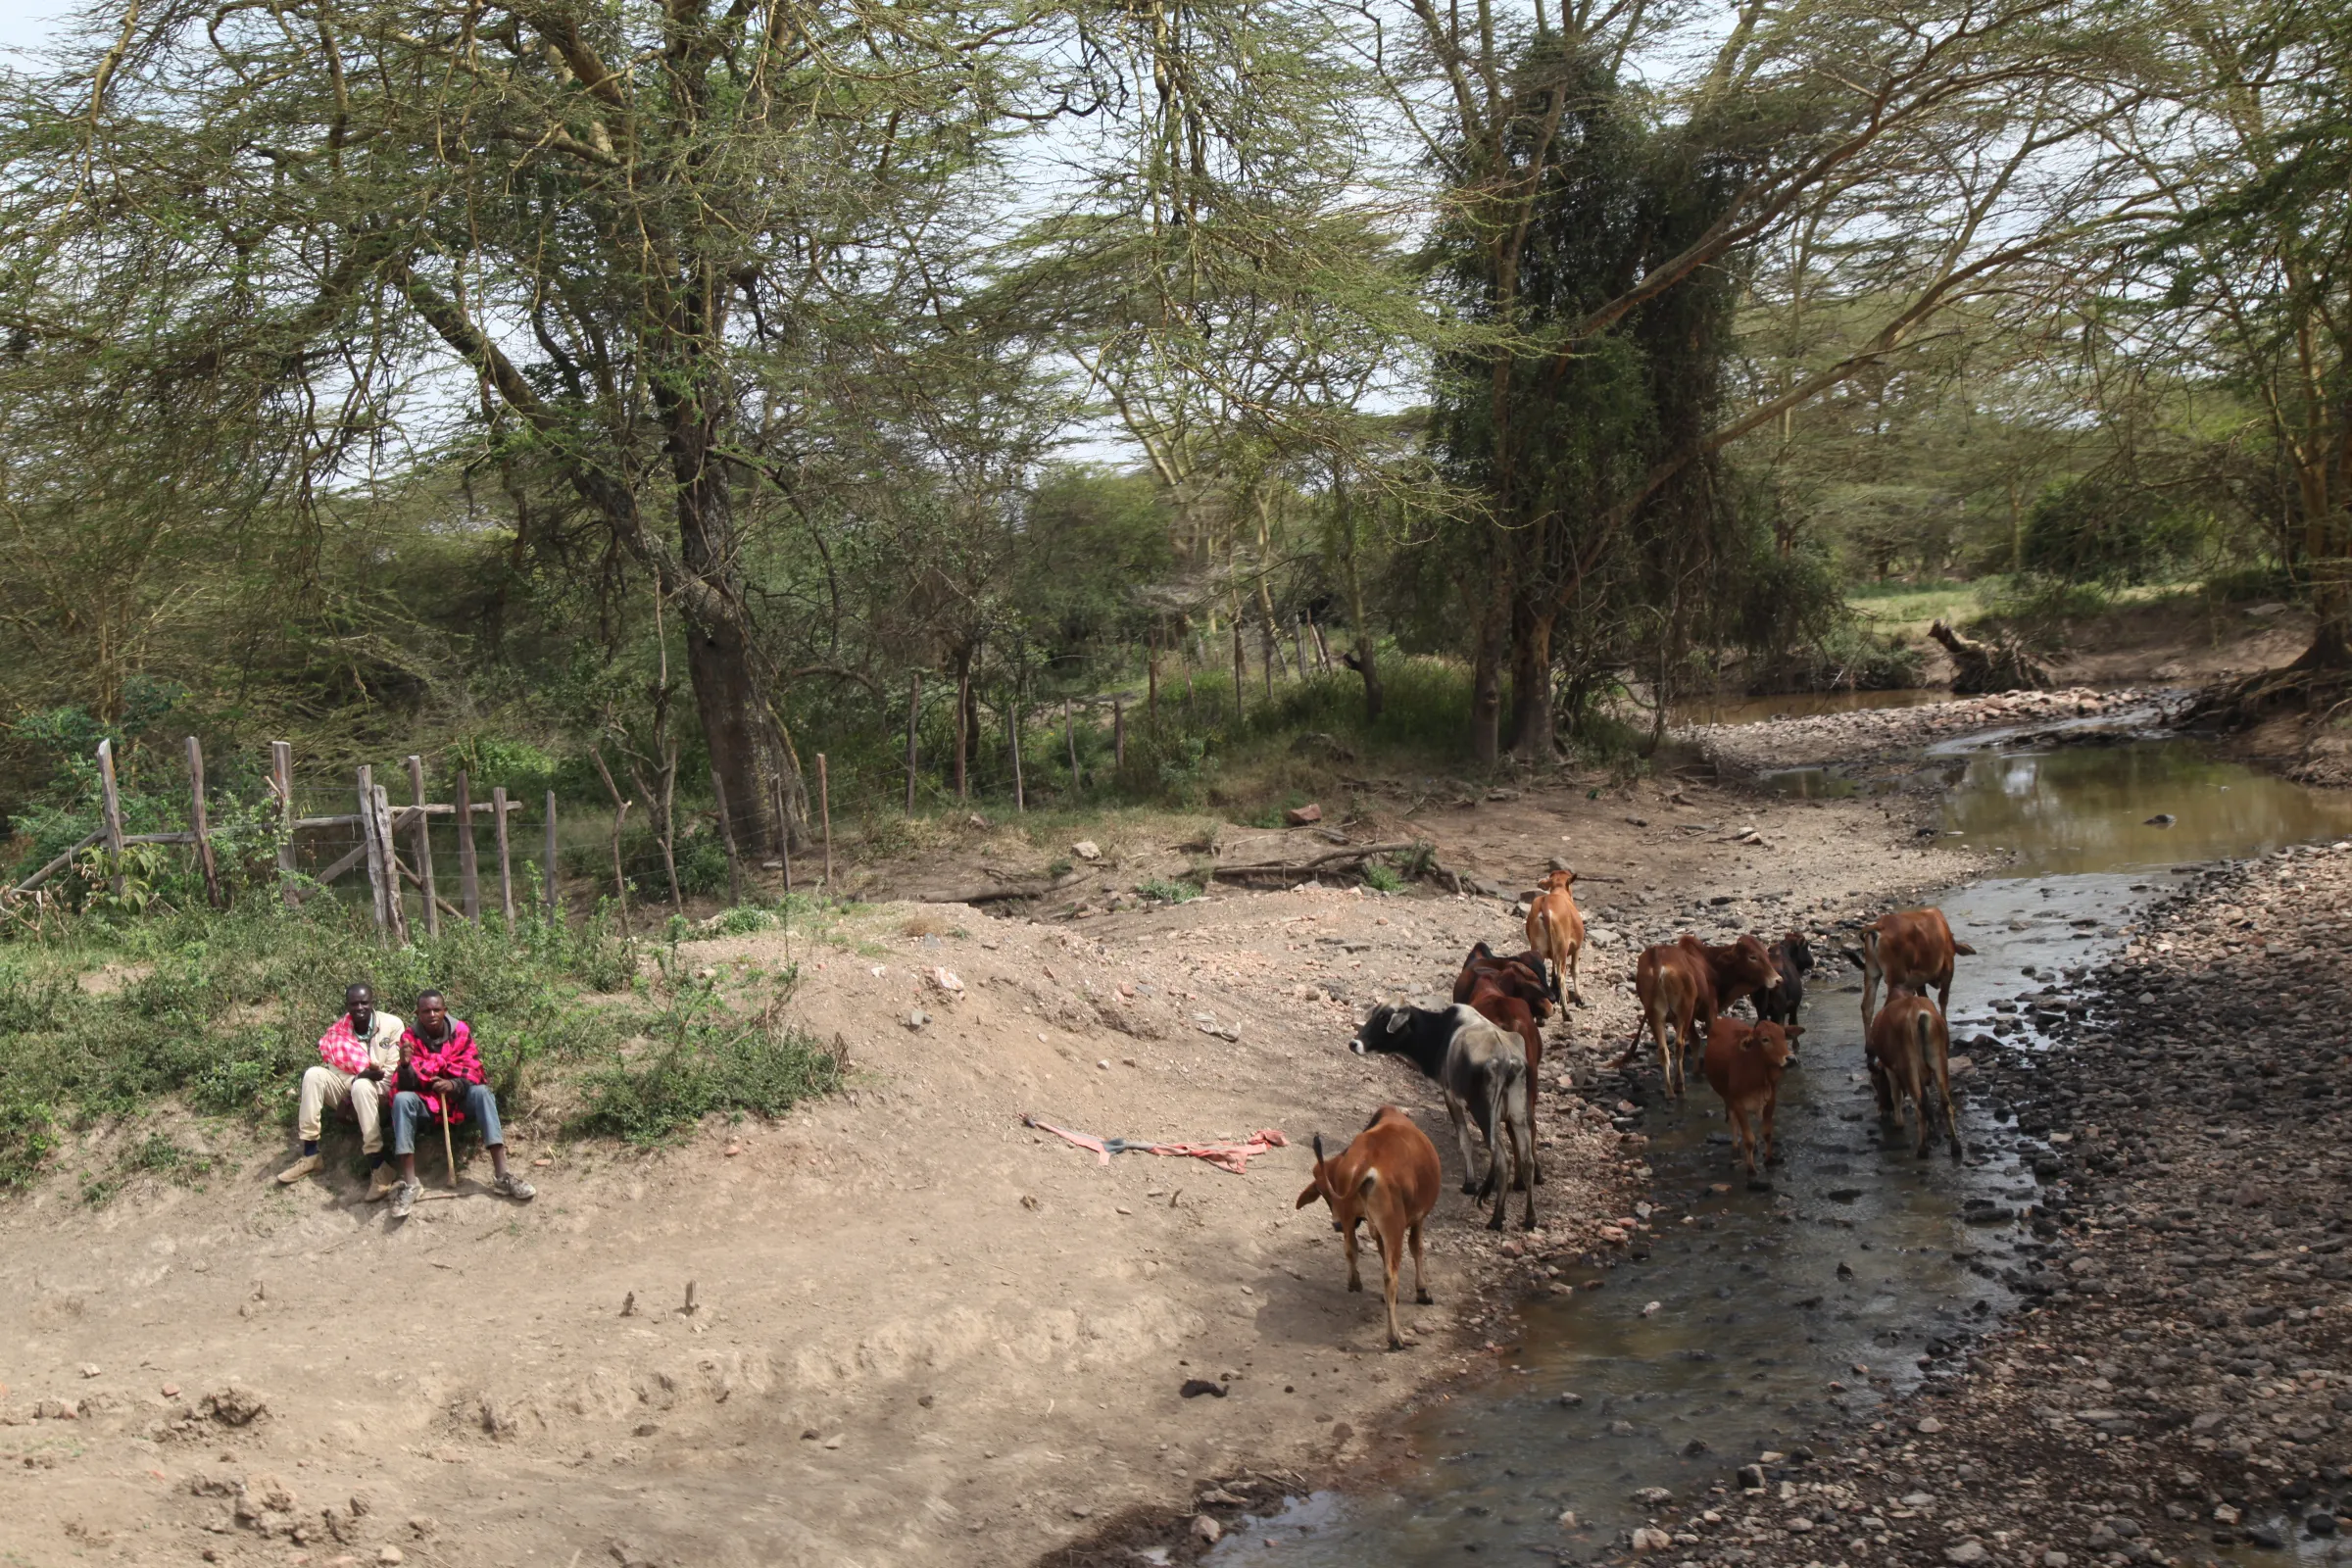 Maasai herders in the forest with their livestock by the water in Narok county, Kenya